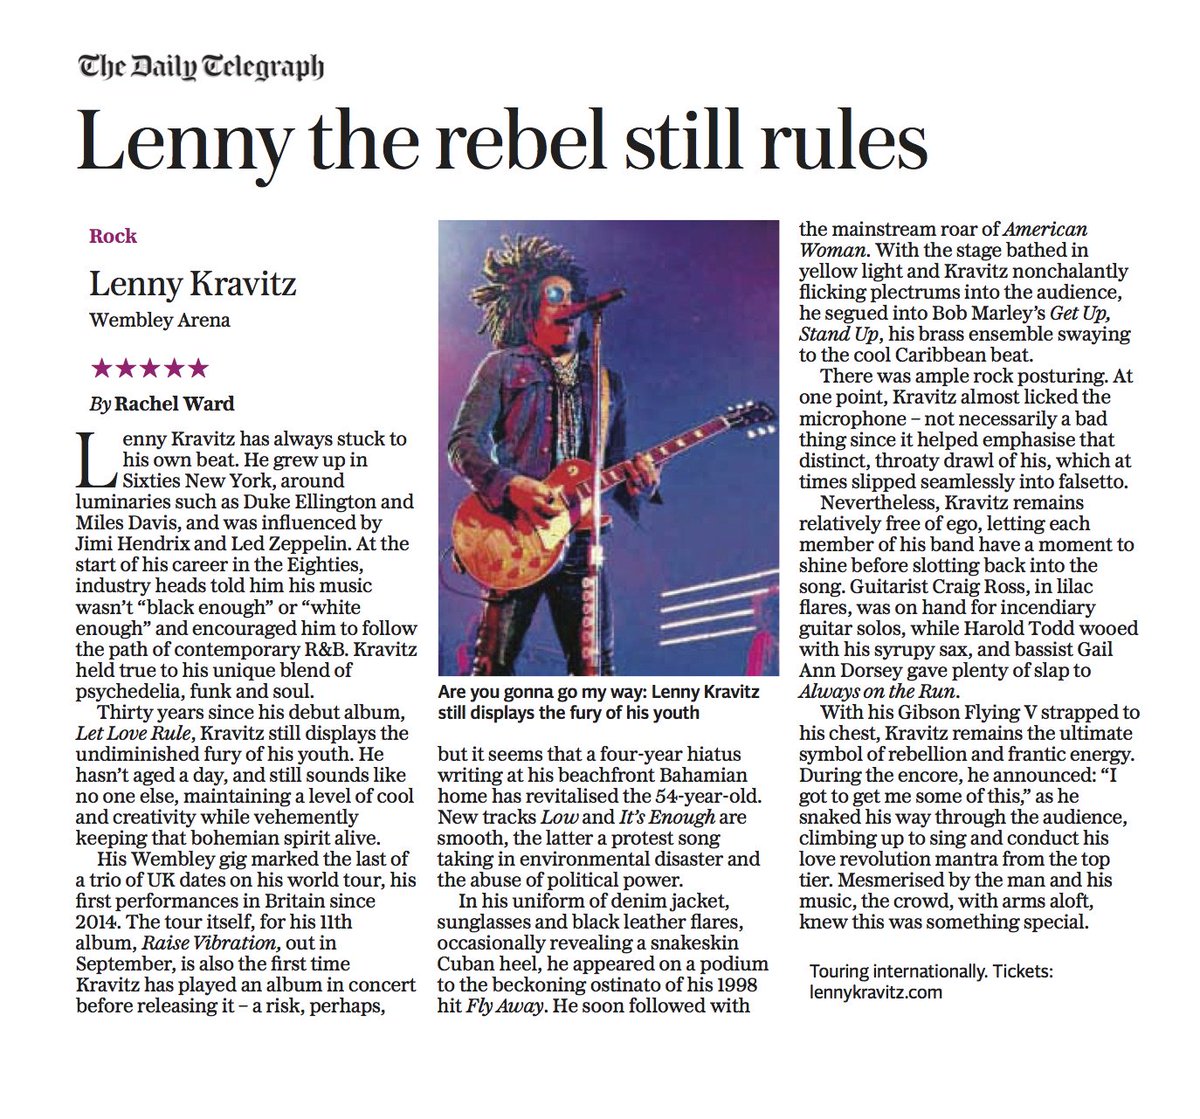 A night to remember at @wembleystadium. #RaiseVibrationTour

Find the full review here: https://t.co/W1o6ddYSJI https://t.co/1fU0hI7ELw